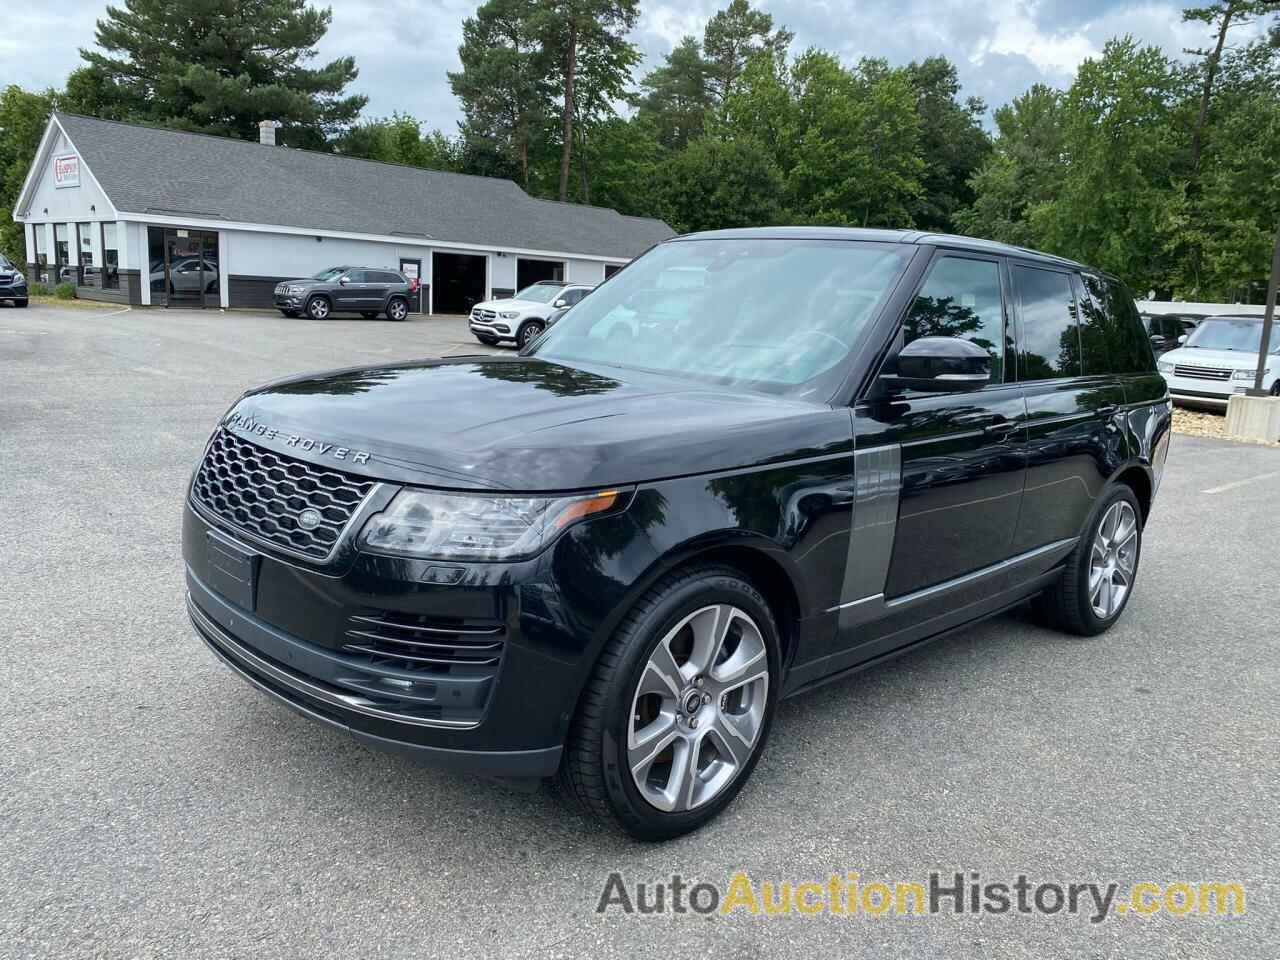 2018 LAND ROVER RANGEROVER SUPERCHARGED, SALGS2RE2JA385214